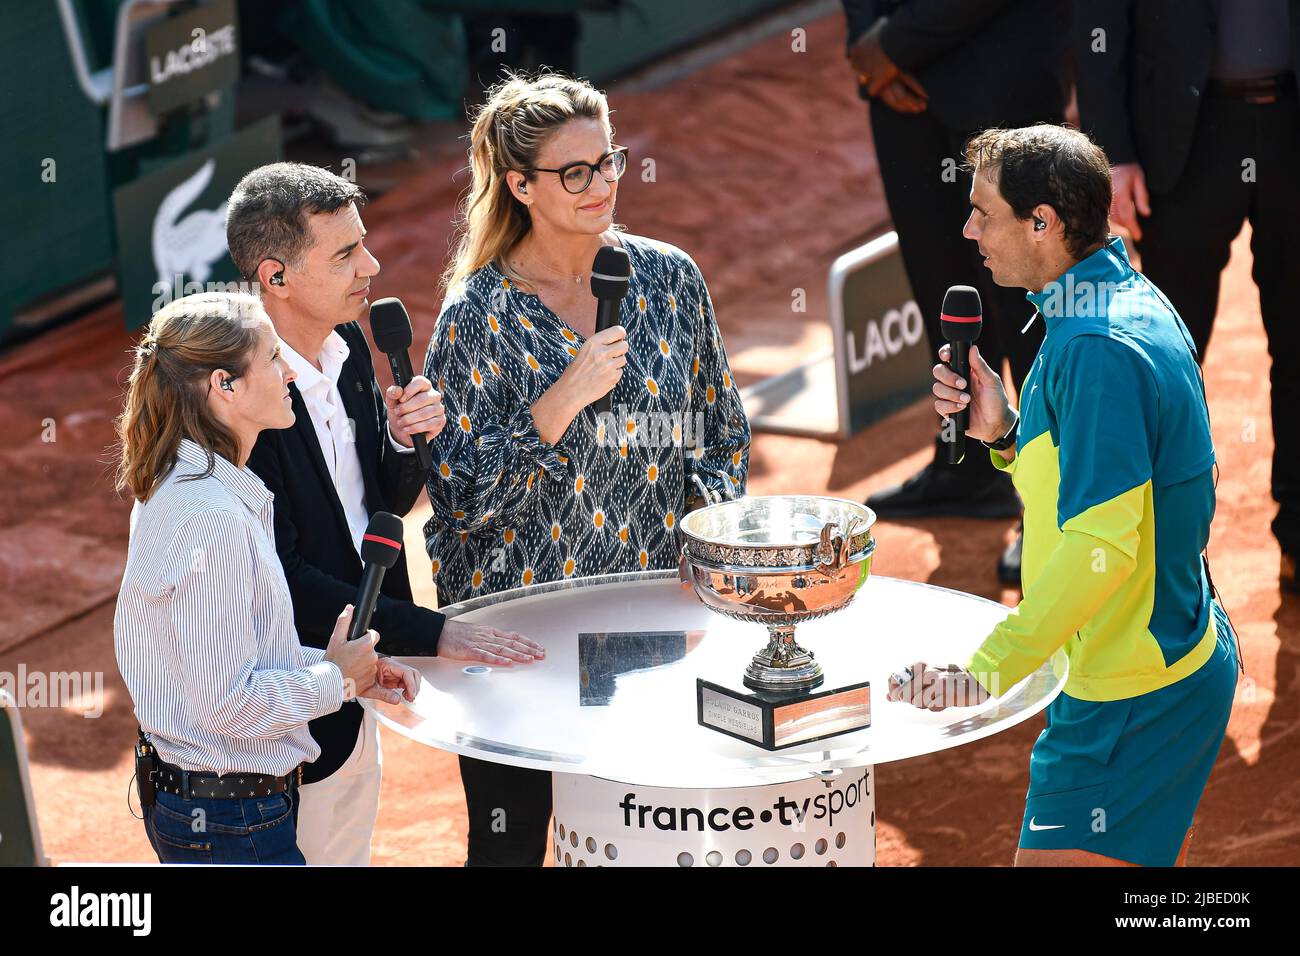 Paris, France - 05/06/2022, Rafael 'Rafa' Nadal of Spain with the trophy is interviewed by the French television channel 'France Televisions' ('France TV Sport', 'France 2') with Justine Henin, Laurent Luyat and Mary Pierce after the French Open final against Casper Ruud, Grand Slam tennis tournament on June 5, 2022 at Roland-Garros stadium in Paris, France - Photo Victor Joly / DPPI Stock Photo